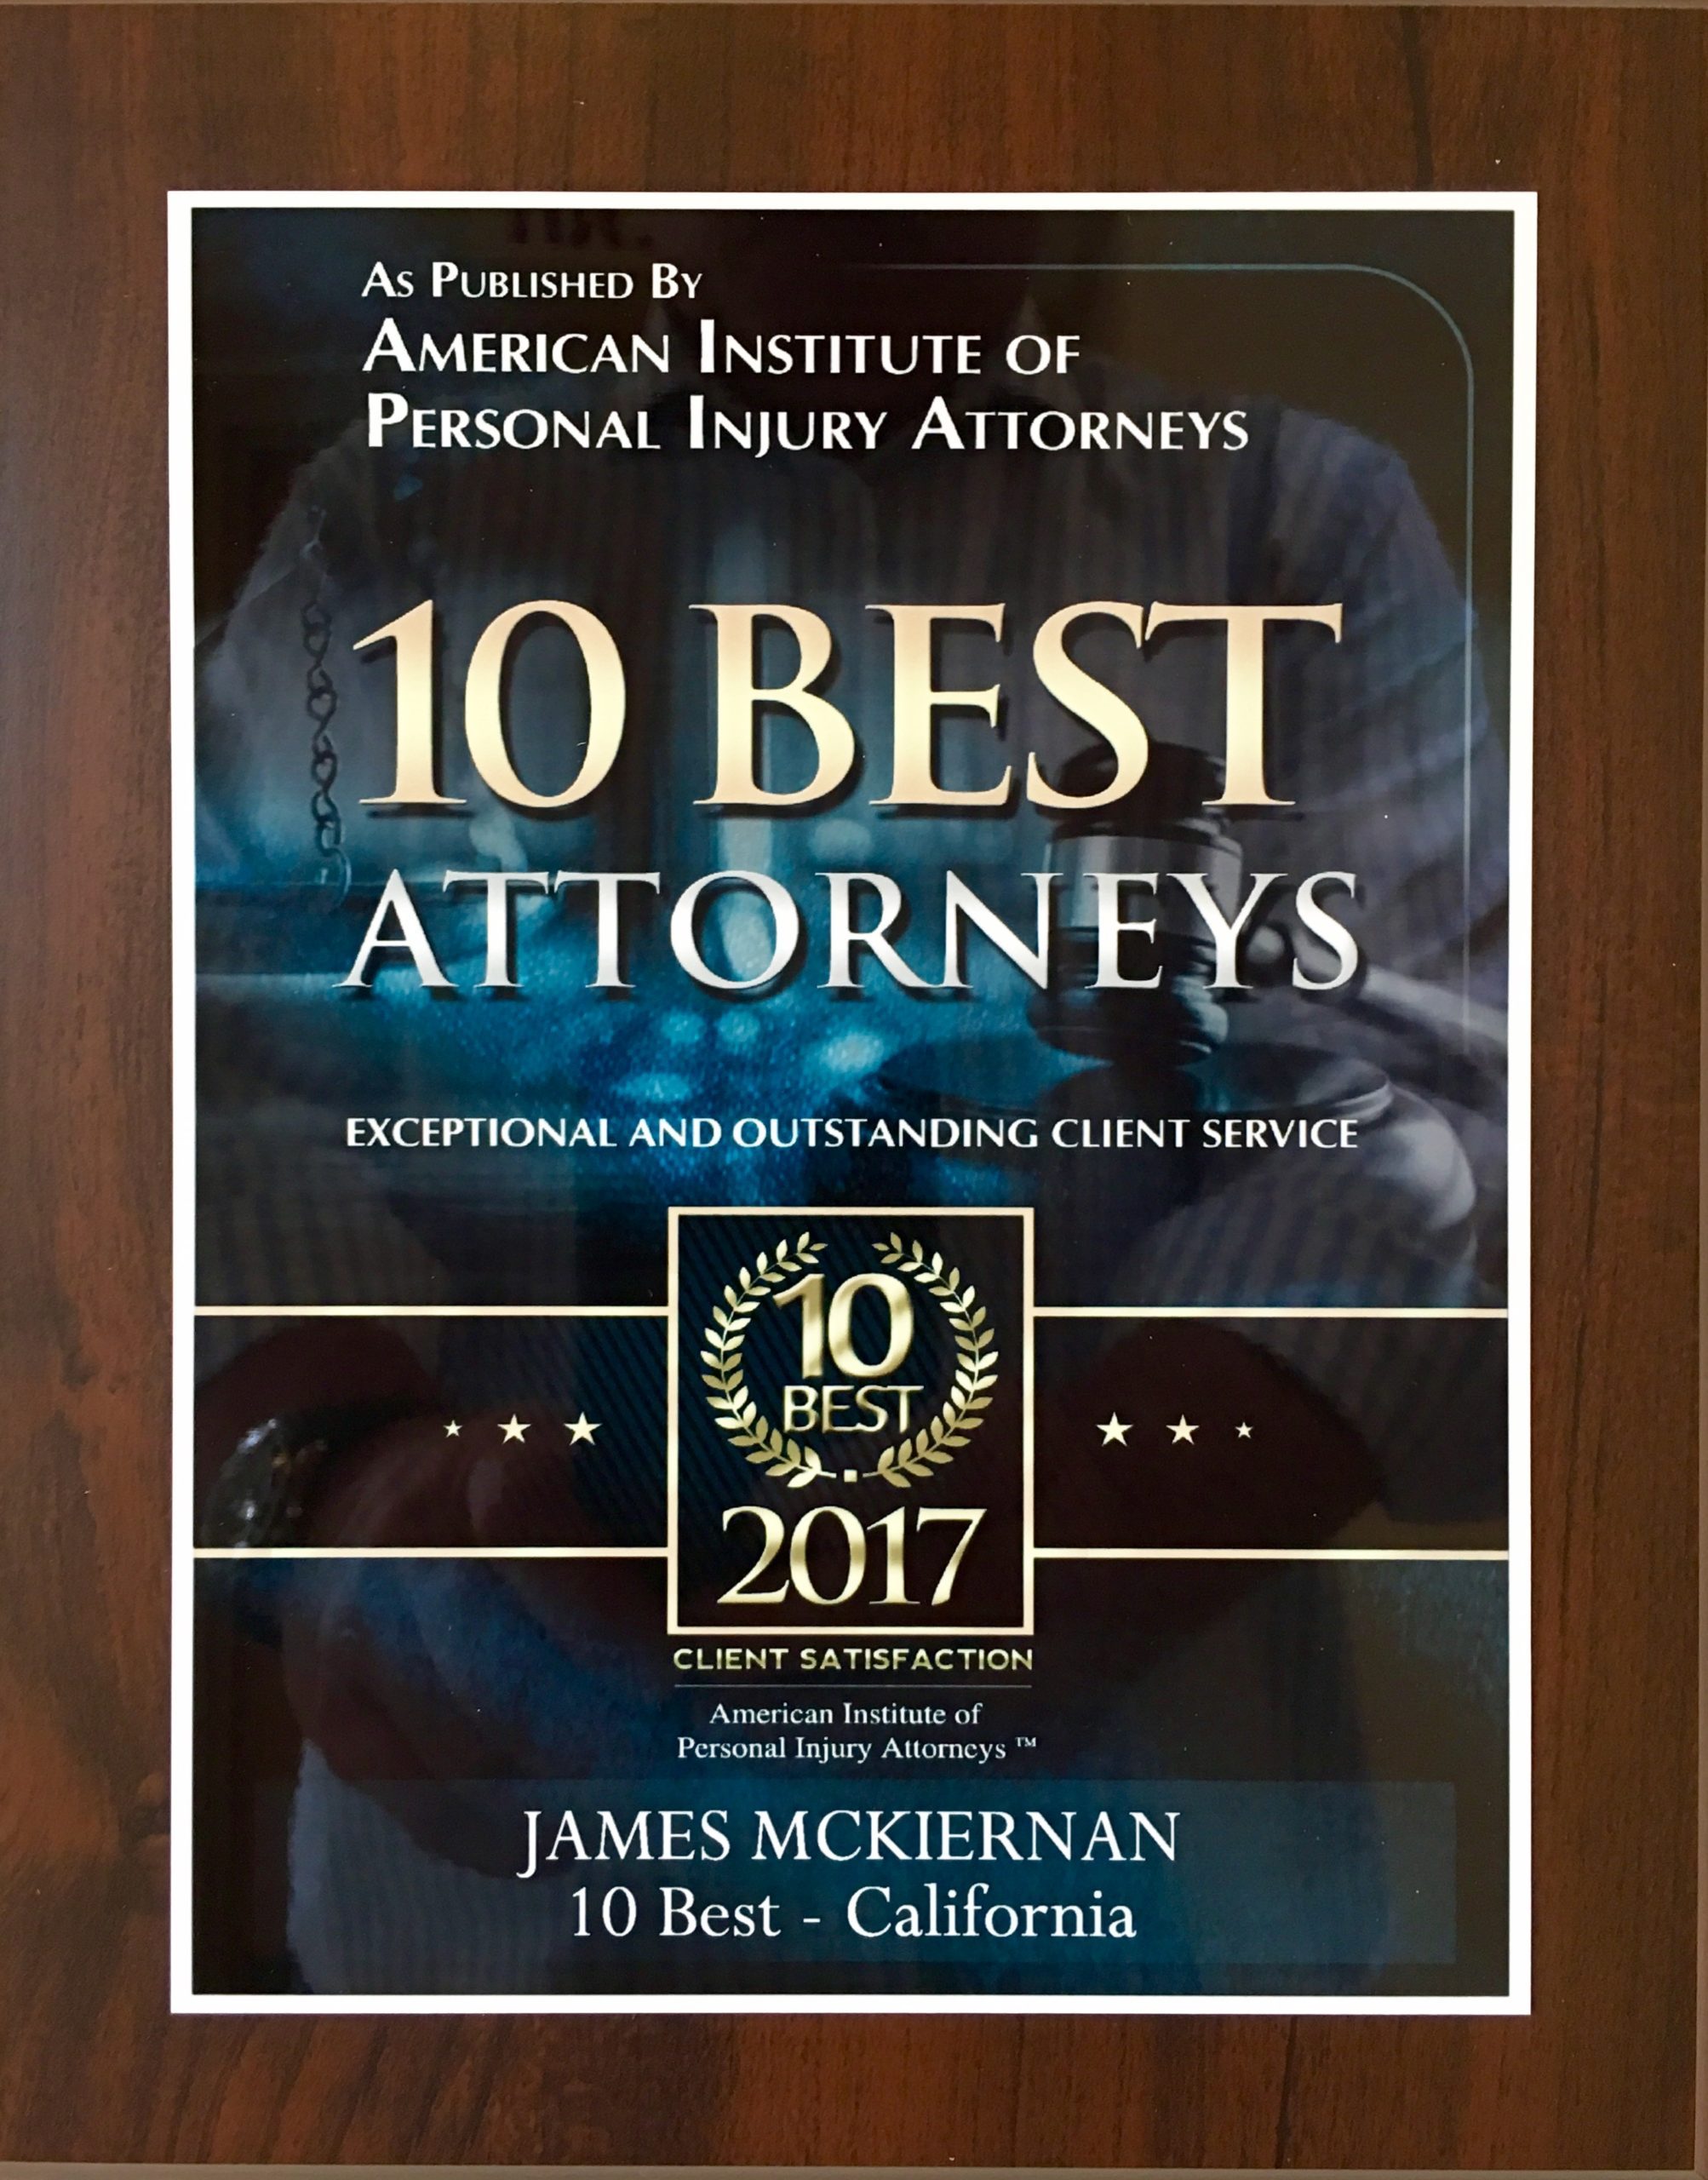 Picture of American Institute of Personal Injury Attorneys 10 Best Attorneys award